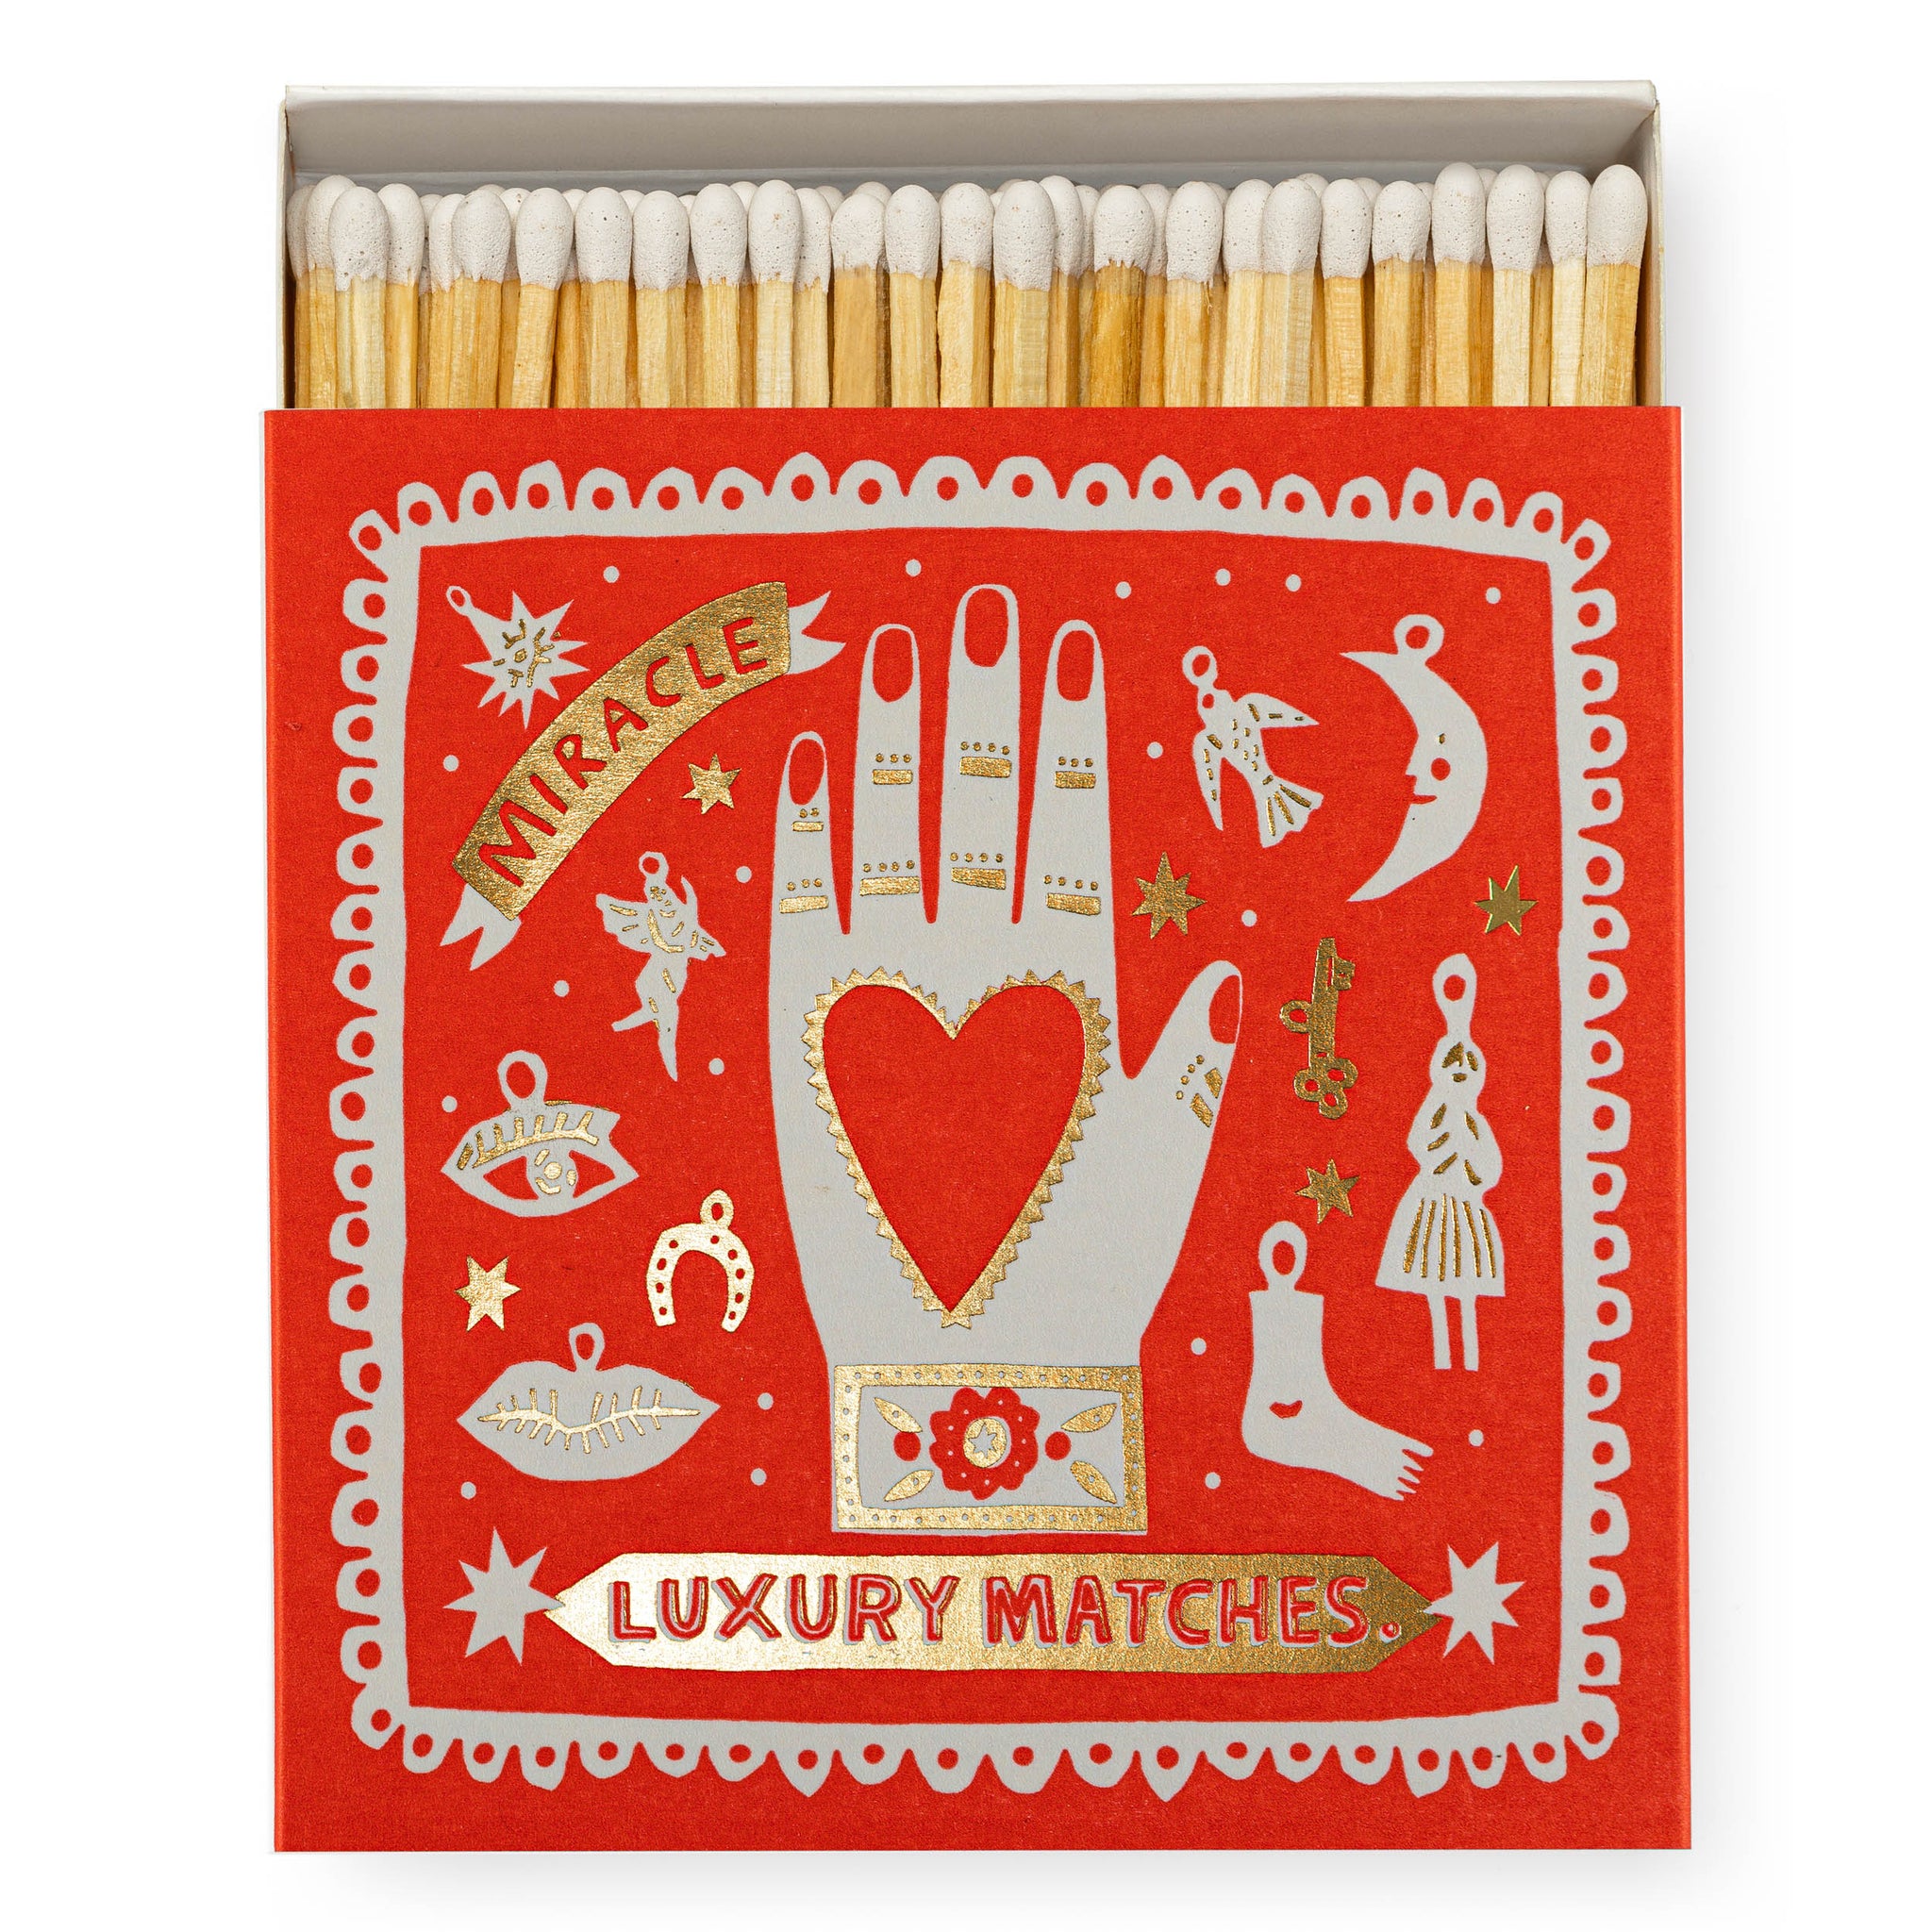 Archivist Gallery Square Matchbox - MIRACLE